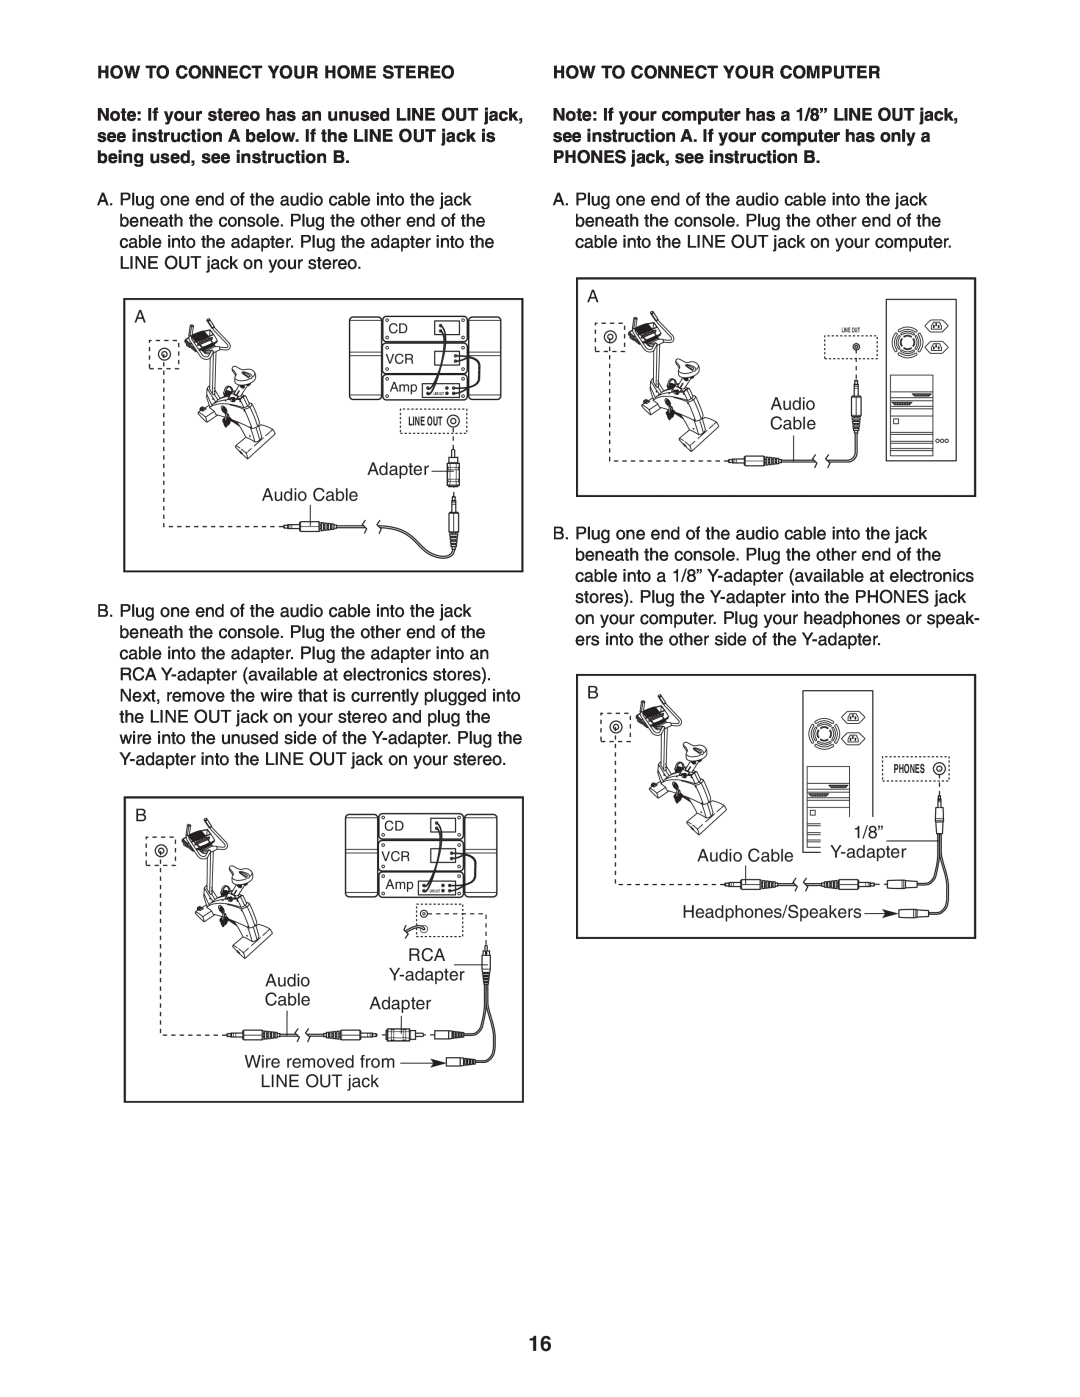 Reebok Fitness RBEX69740 manual How To Connect Your Home Stereo, How To Connect Your Computer, Amp LINE OUT, Line Out 